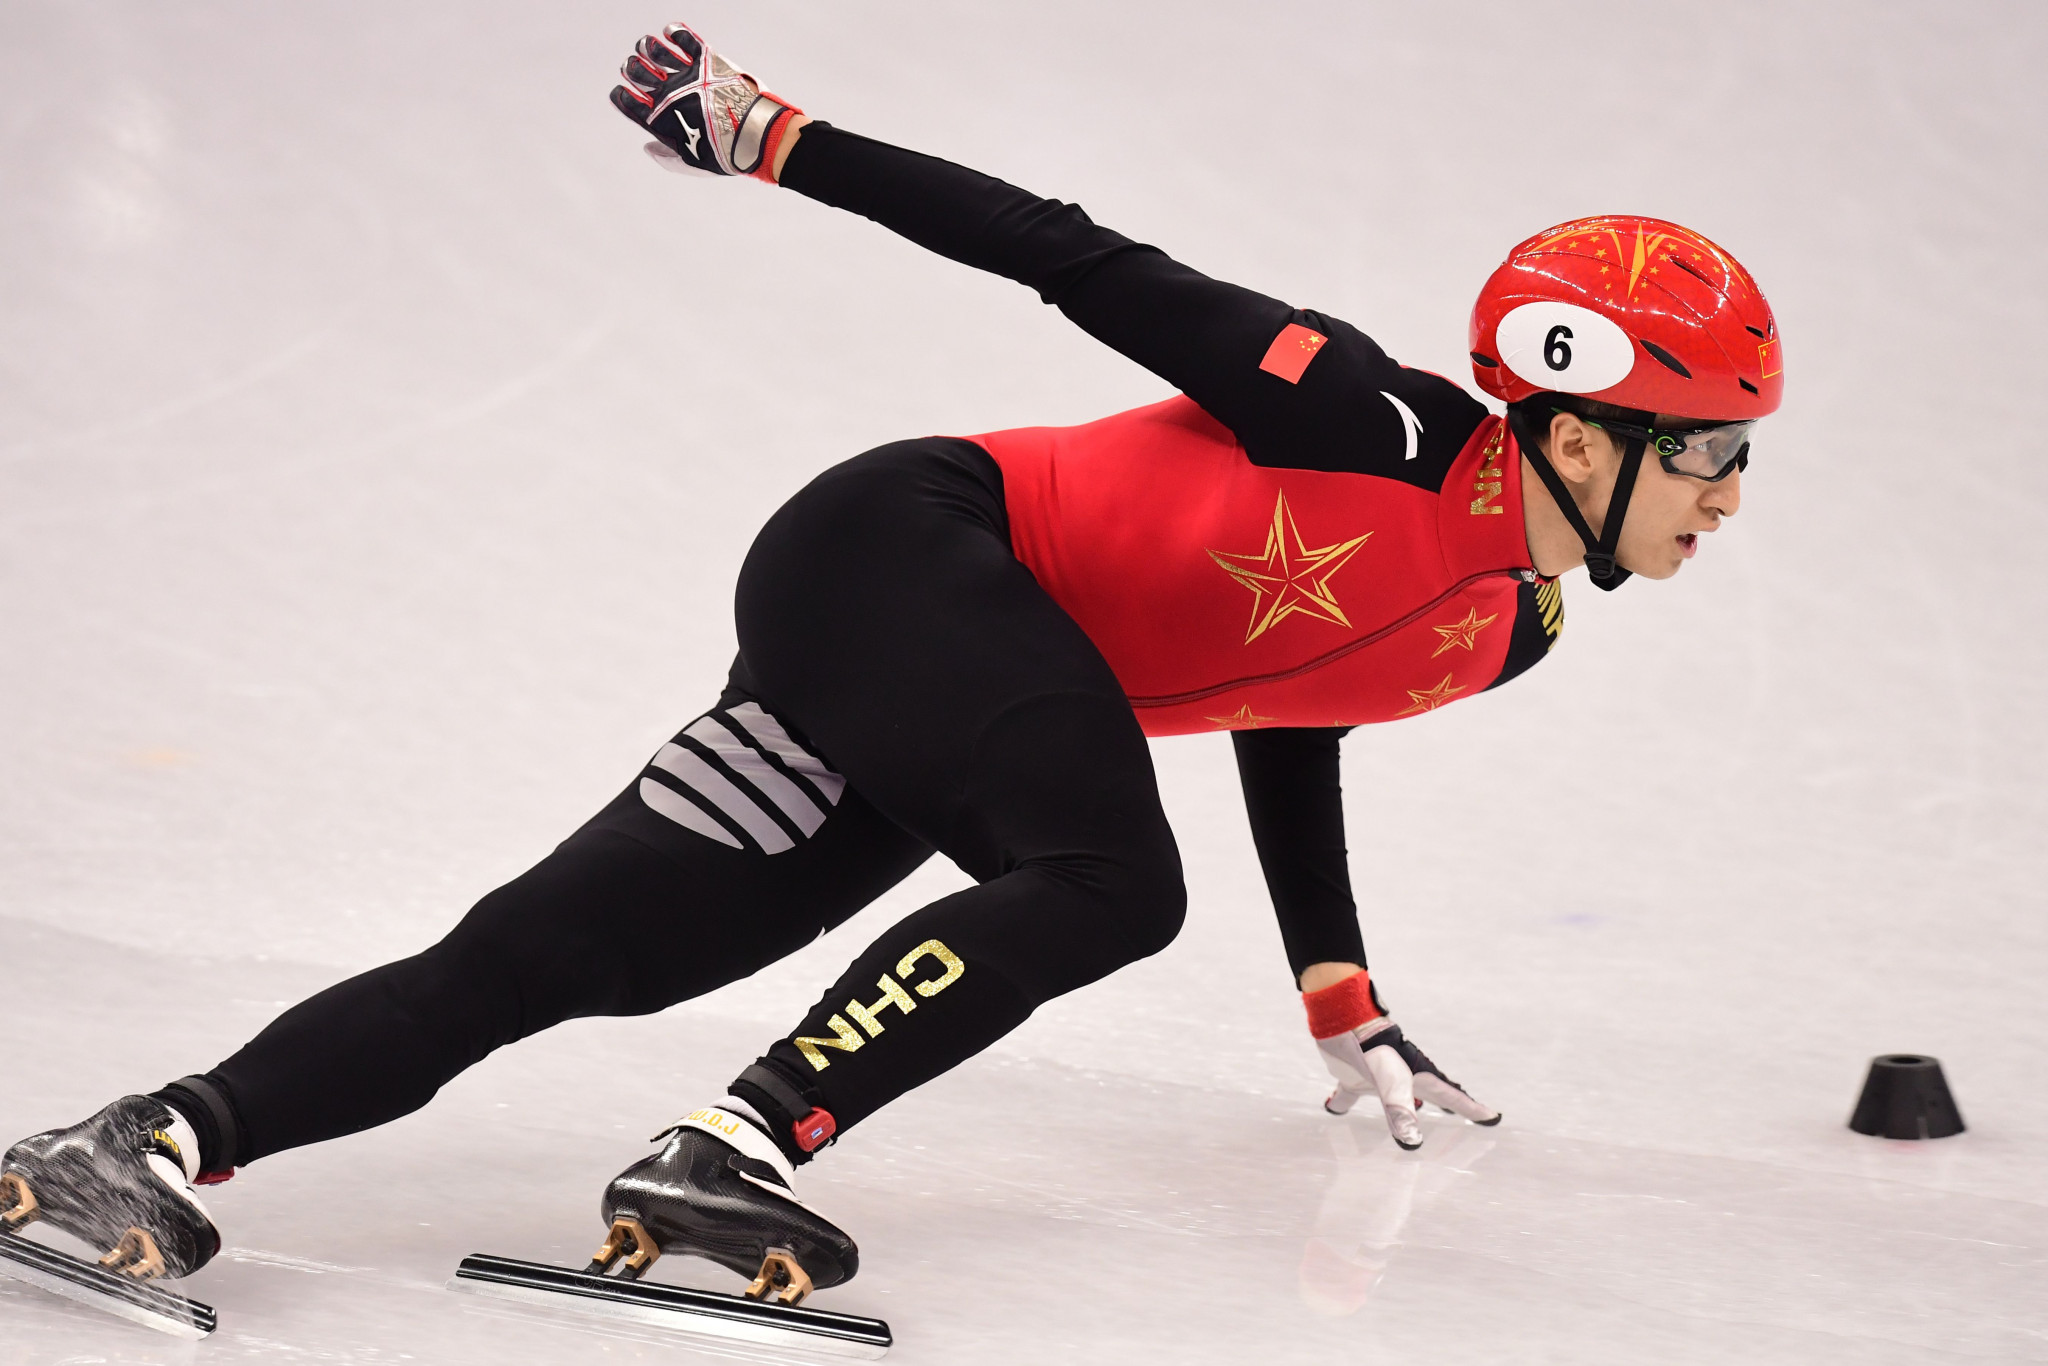 Wu Dajing sealed China's first gold medal at Pyeongchang 2018 with a world record-breaking display ©Getty Images